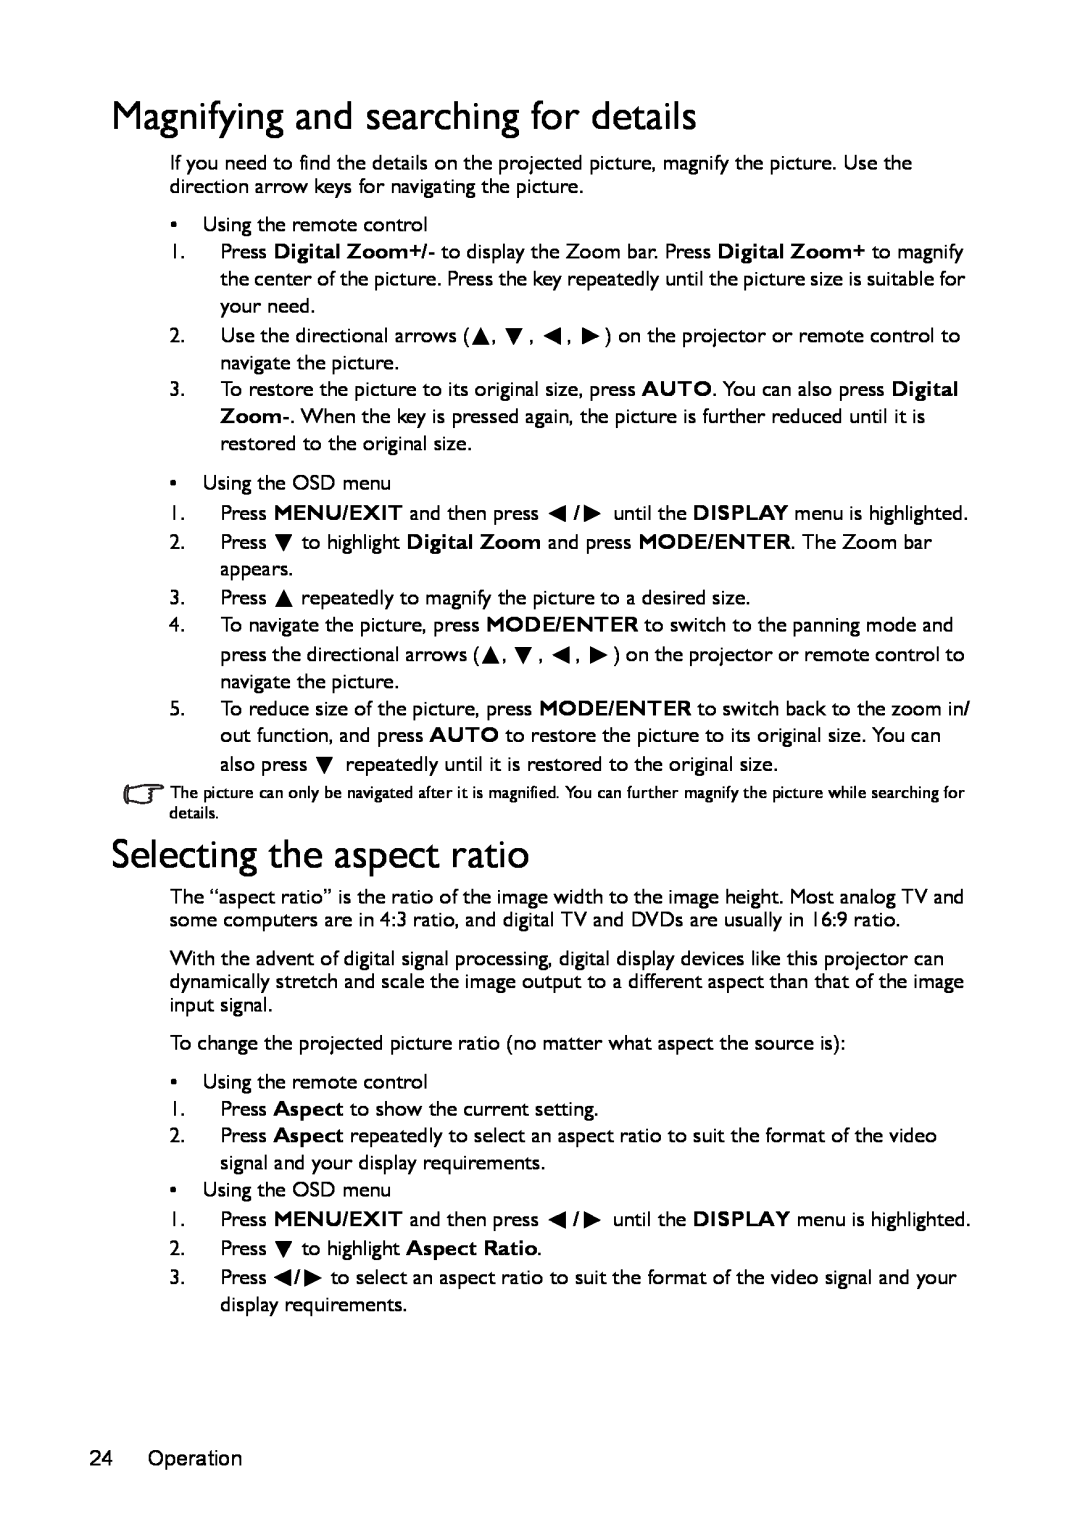 BenQ mx618st, ms616st user manual Magnifying and searching for details, Selecting the aspect ratio 